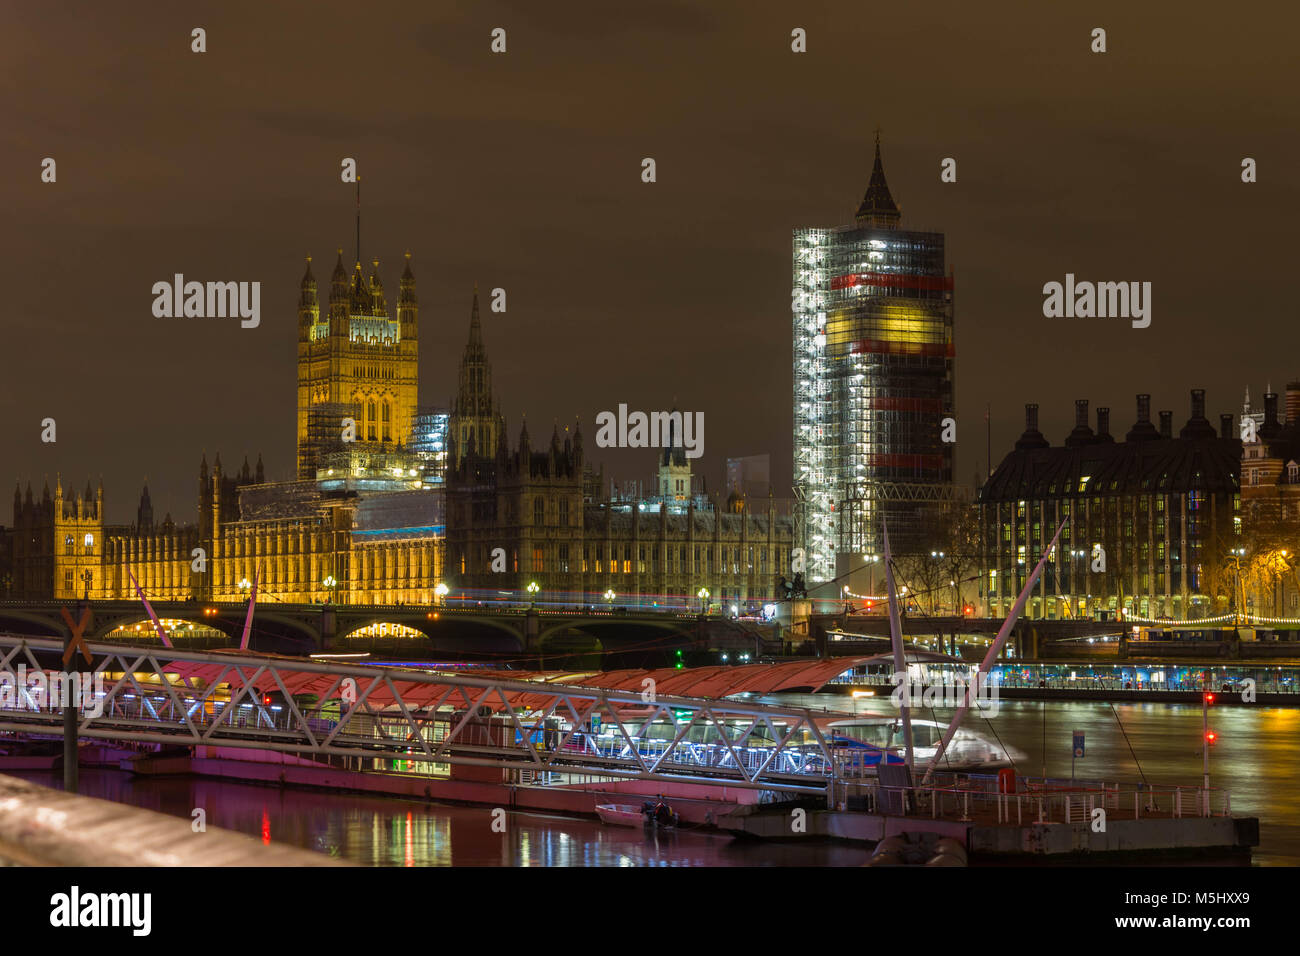 London, United Kingdom, February 17, 2018: Westminster bridge and big ben renovation scaffolding construction with the house of parliament in view. Stock Photo